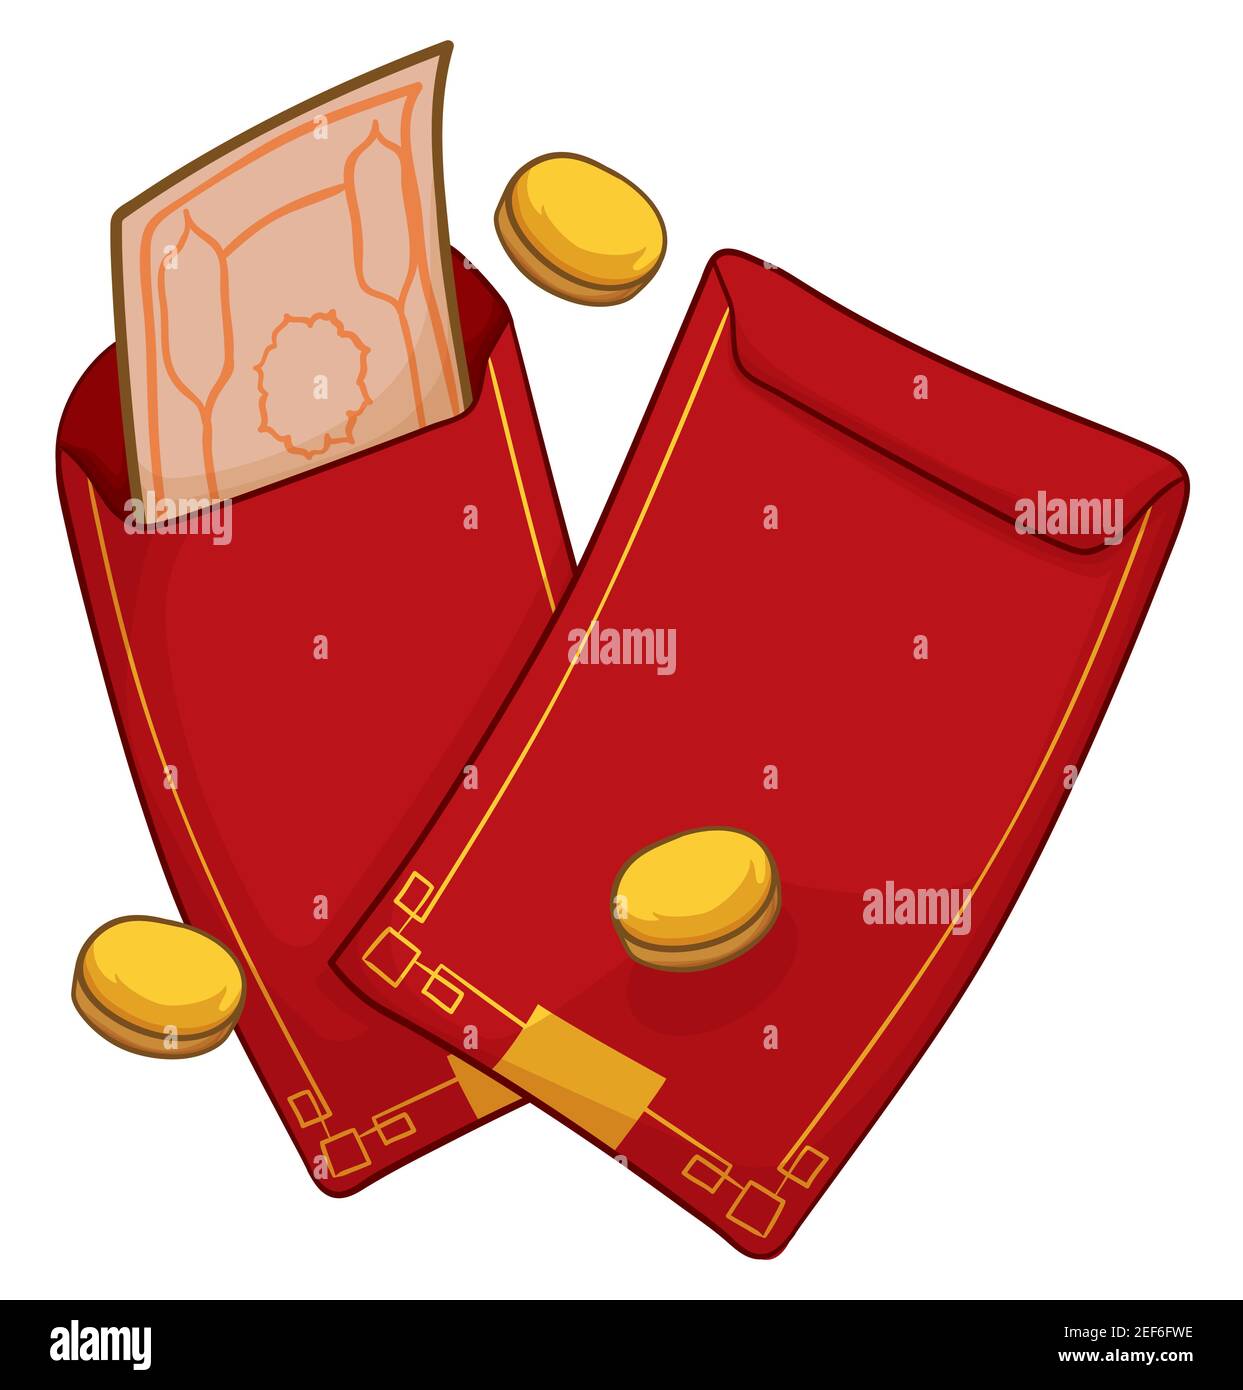 Pair of red envelopes, one opened with banknote and golden coins for Chinese holidays, isolated over white background. Stock Vector